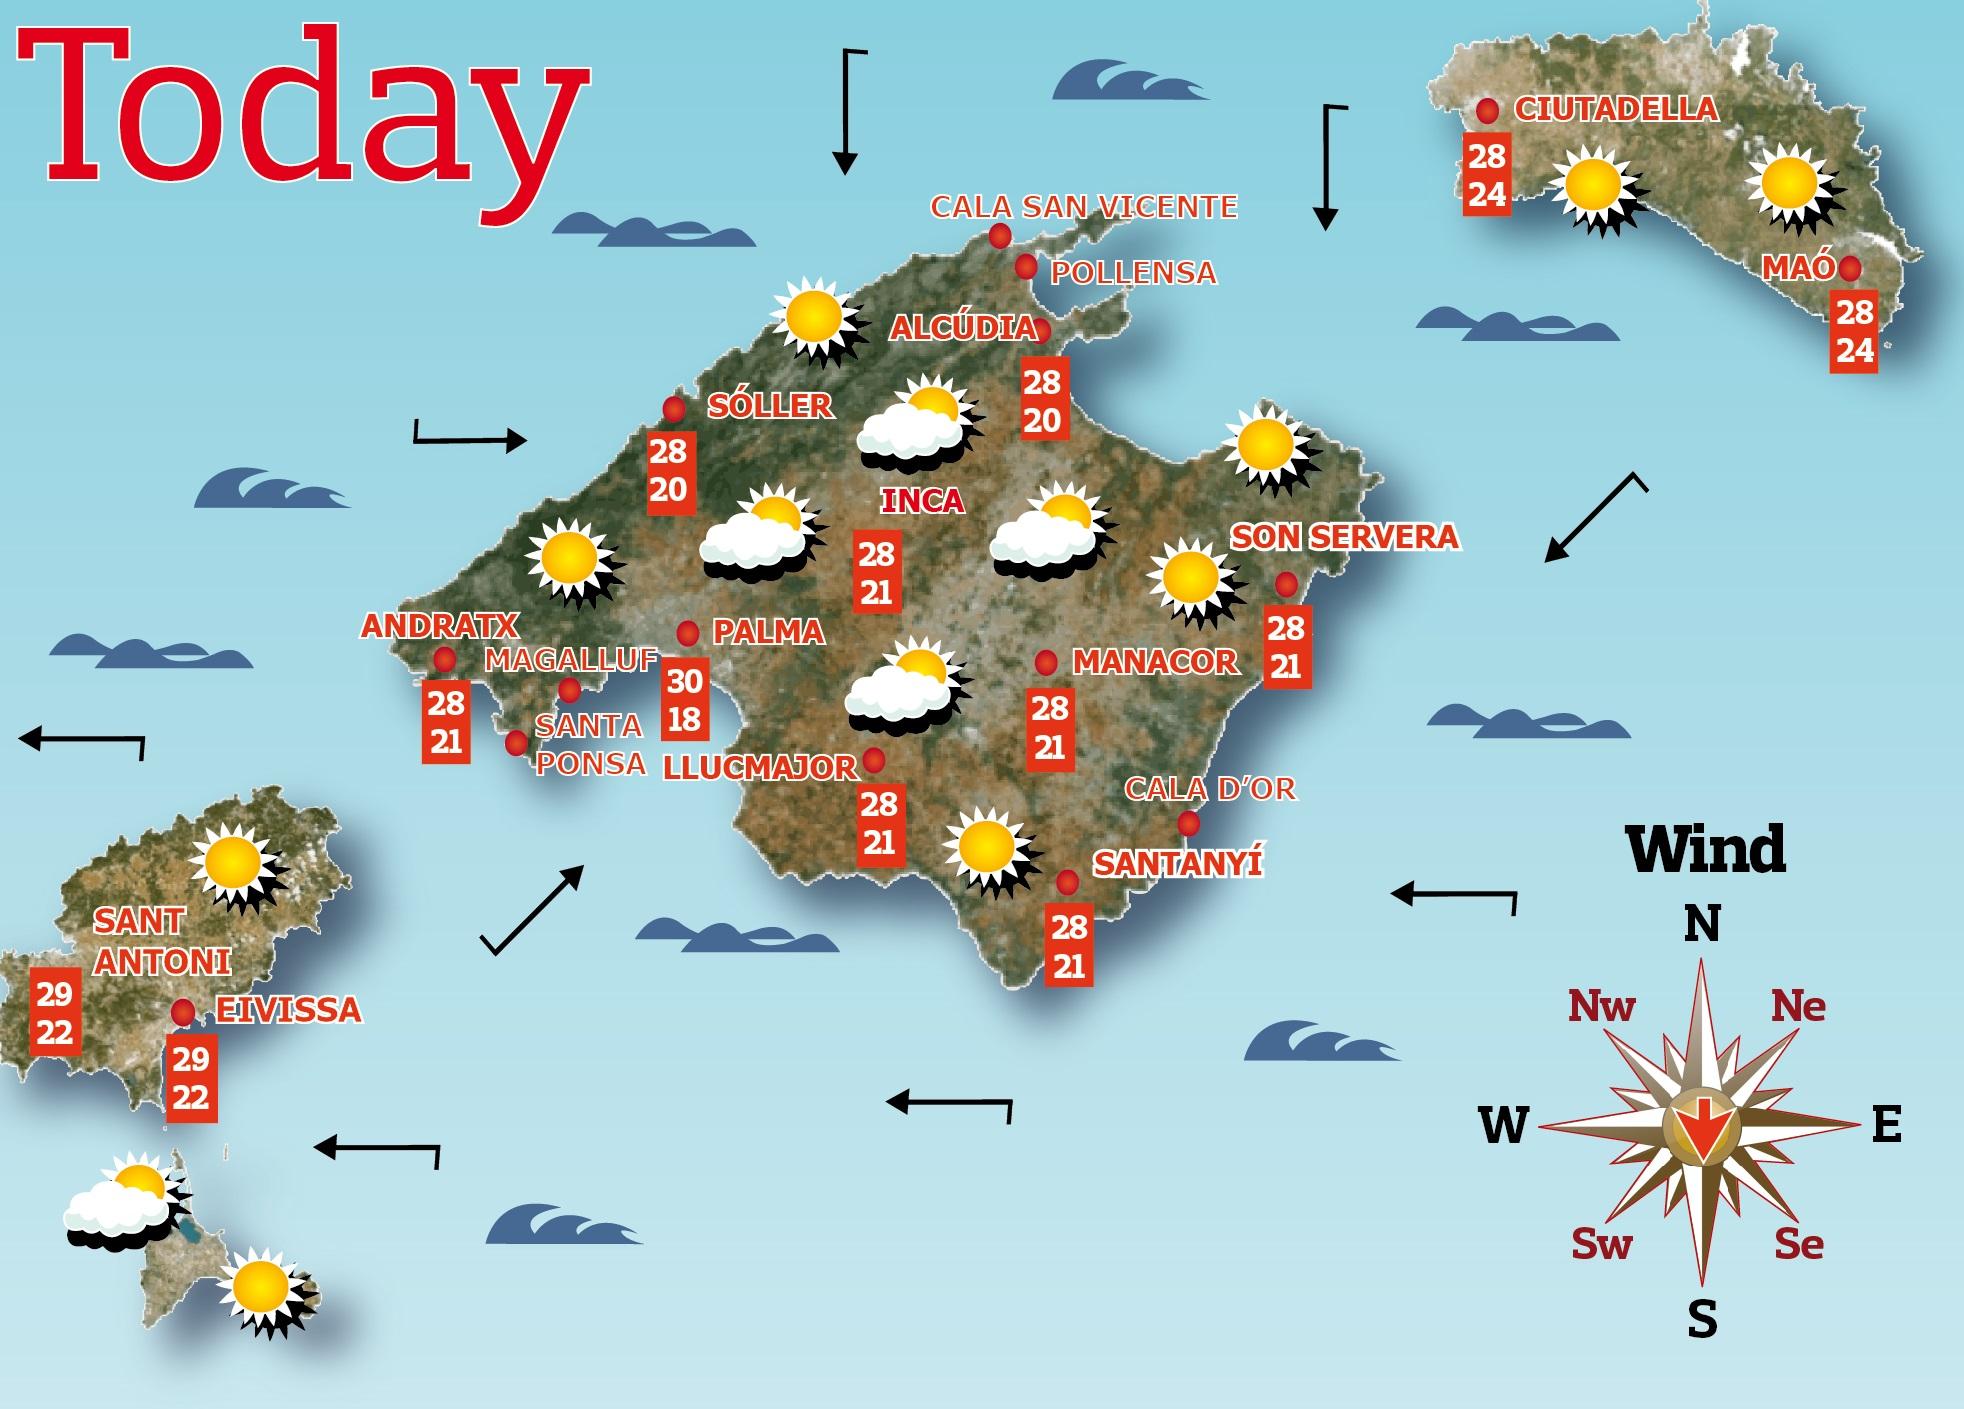 Weather in Majorca today